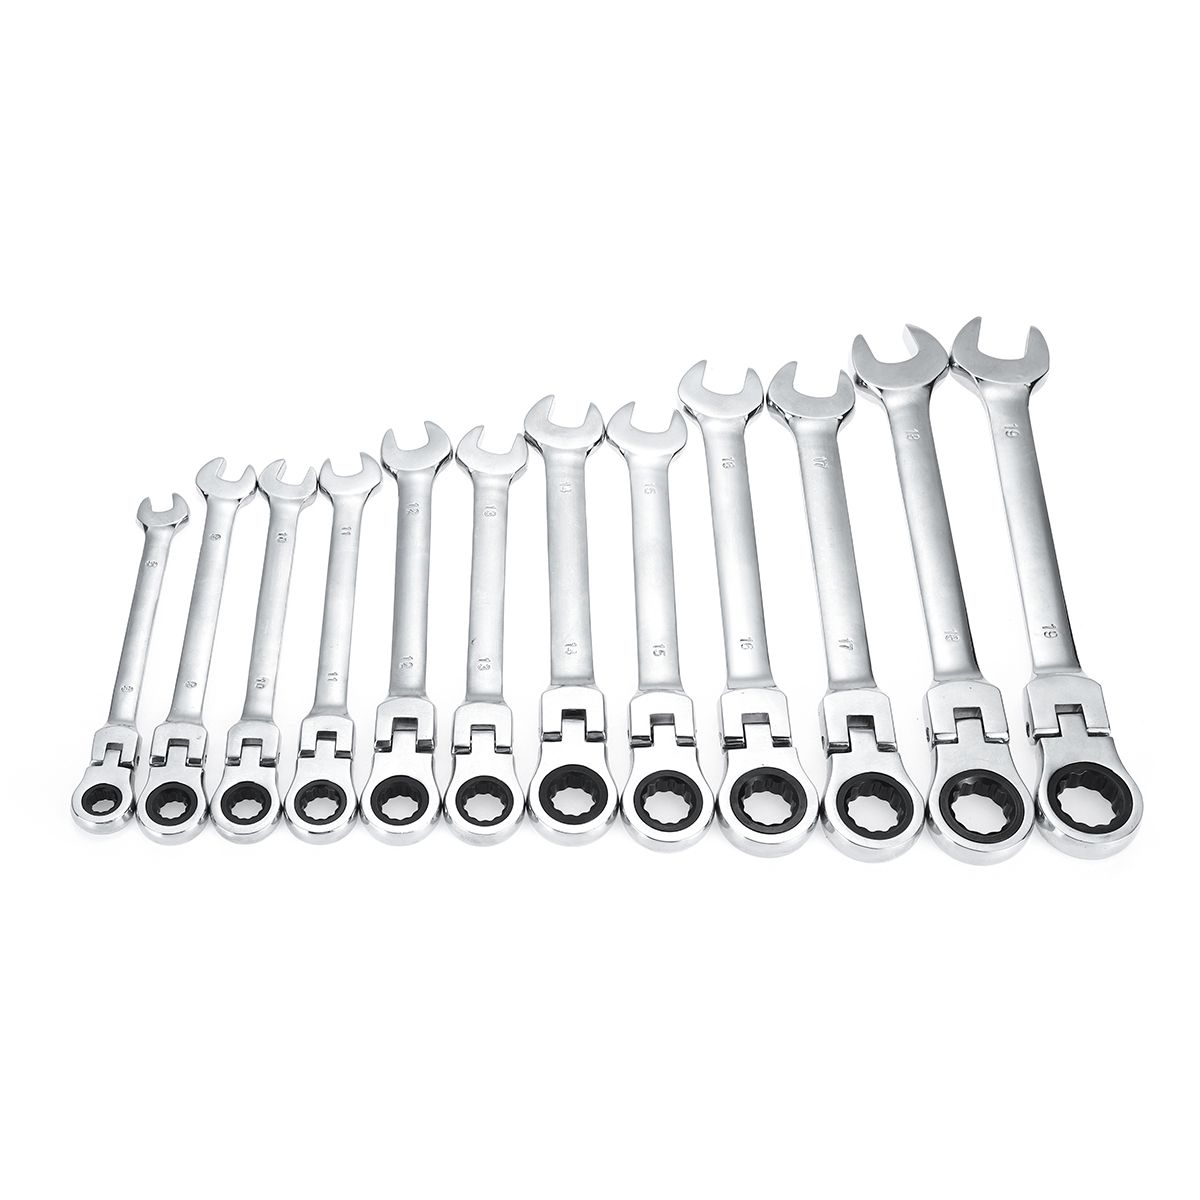 12Pcs-Flex-Head-Ratcheting-Wrench-Set-8-19mm-Metric-Combination-Spanner-with-Pouch-1631679